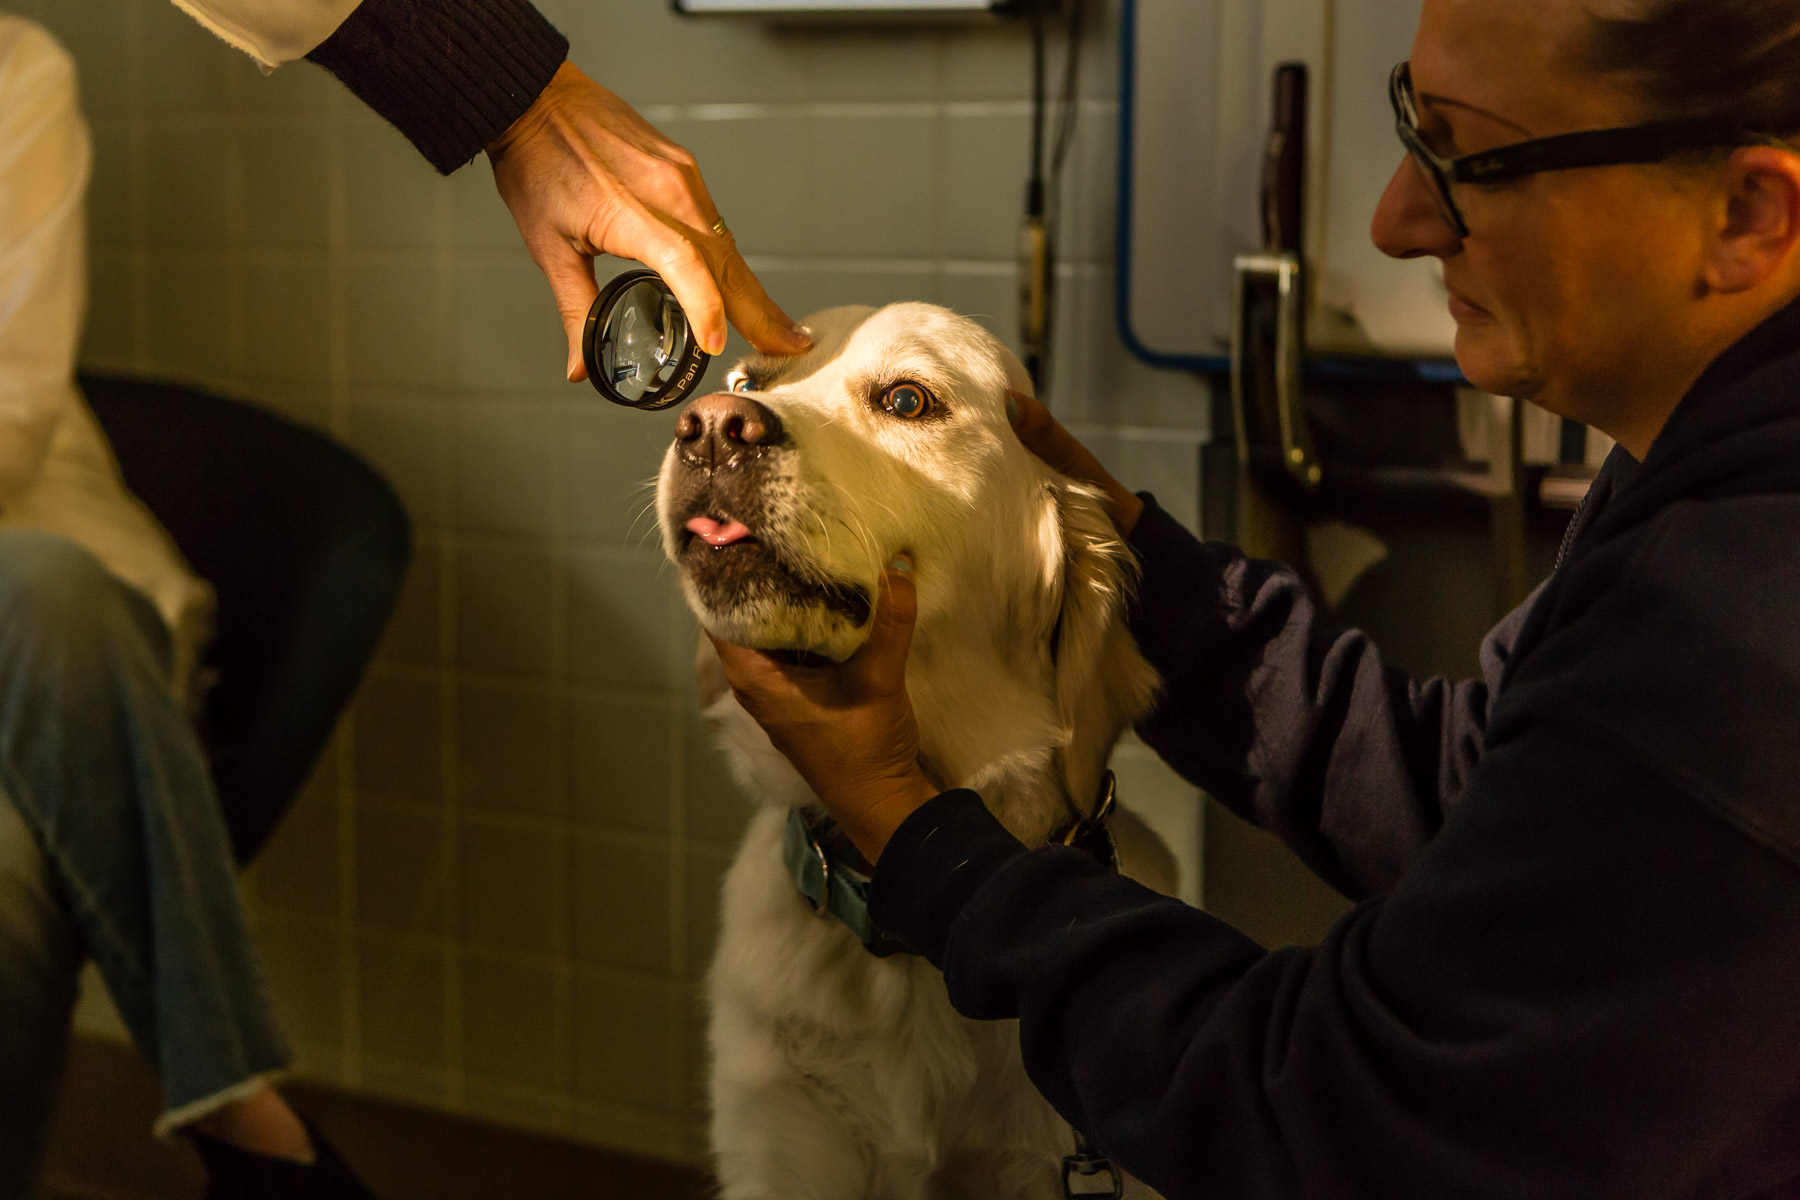 Examining a dog's eyes. Photographed for the Animal Medical Center